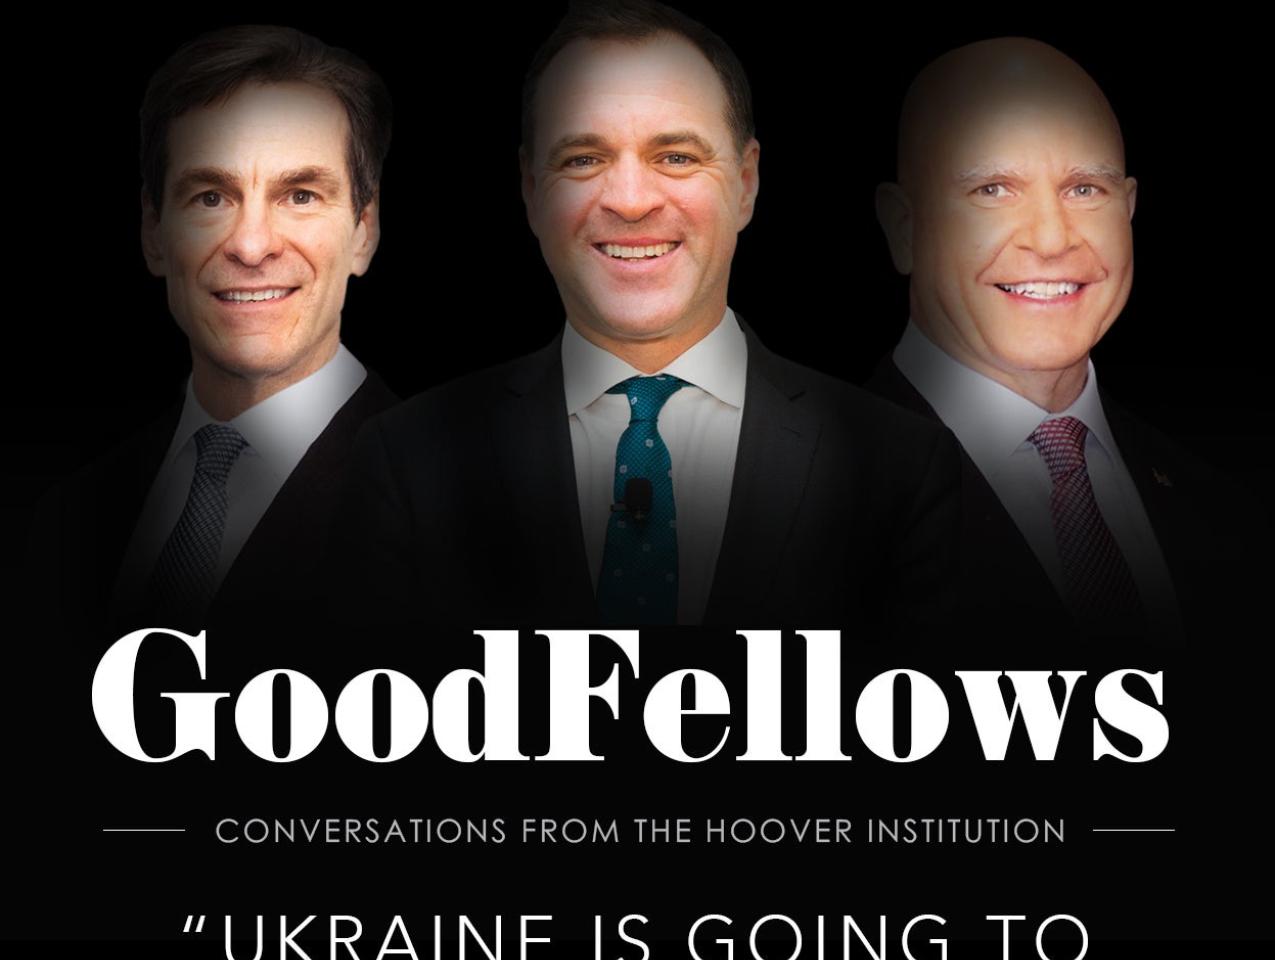 Image for GoodFellows: “Ukraine Is Going To End Up Winning”